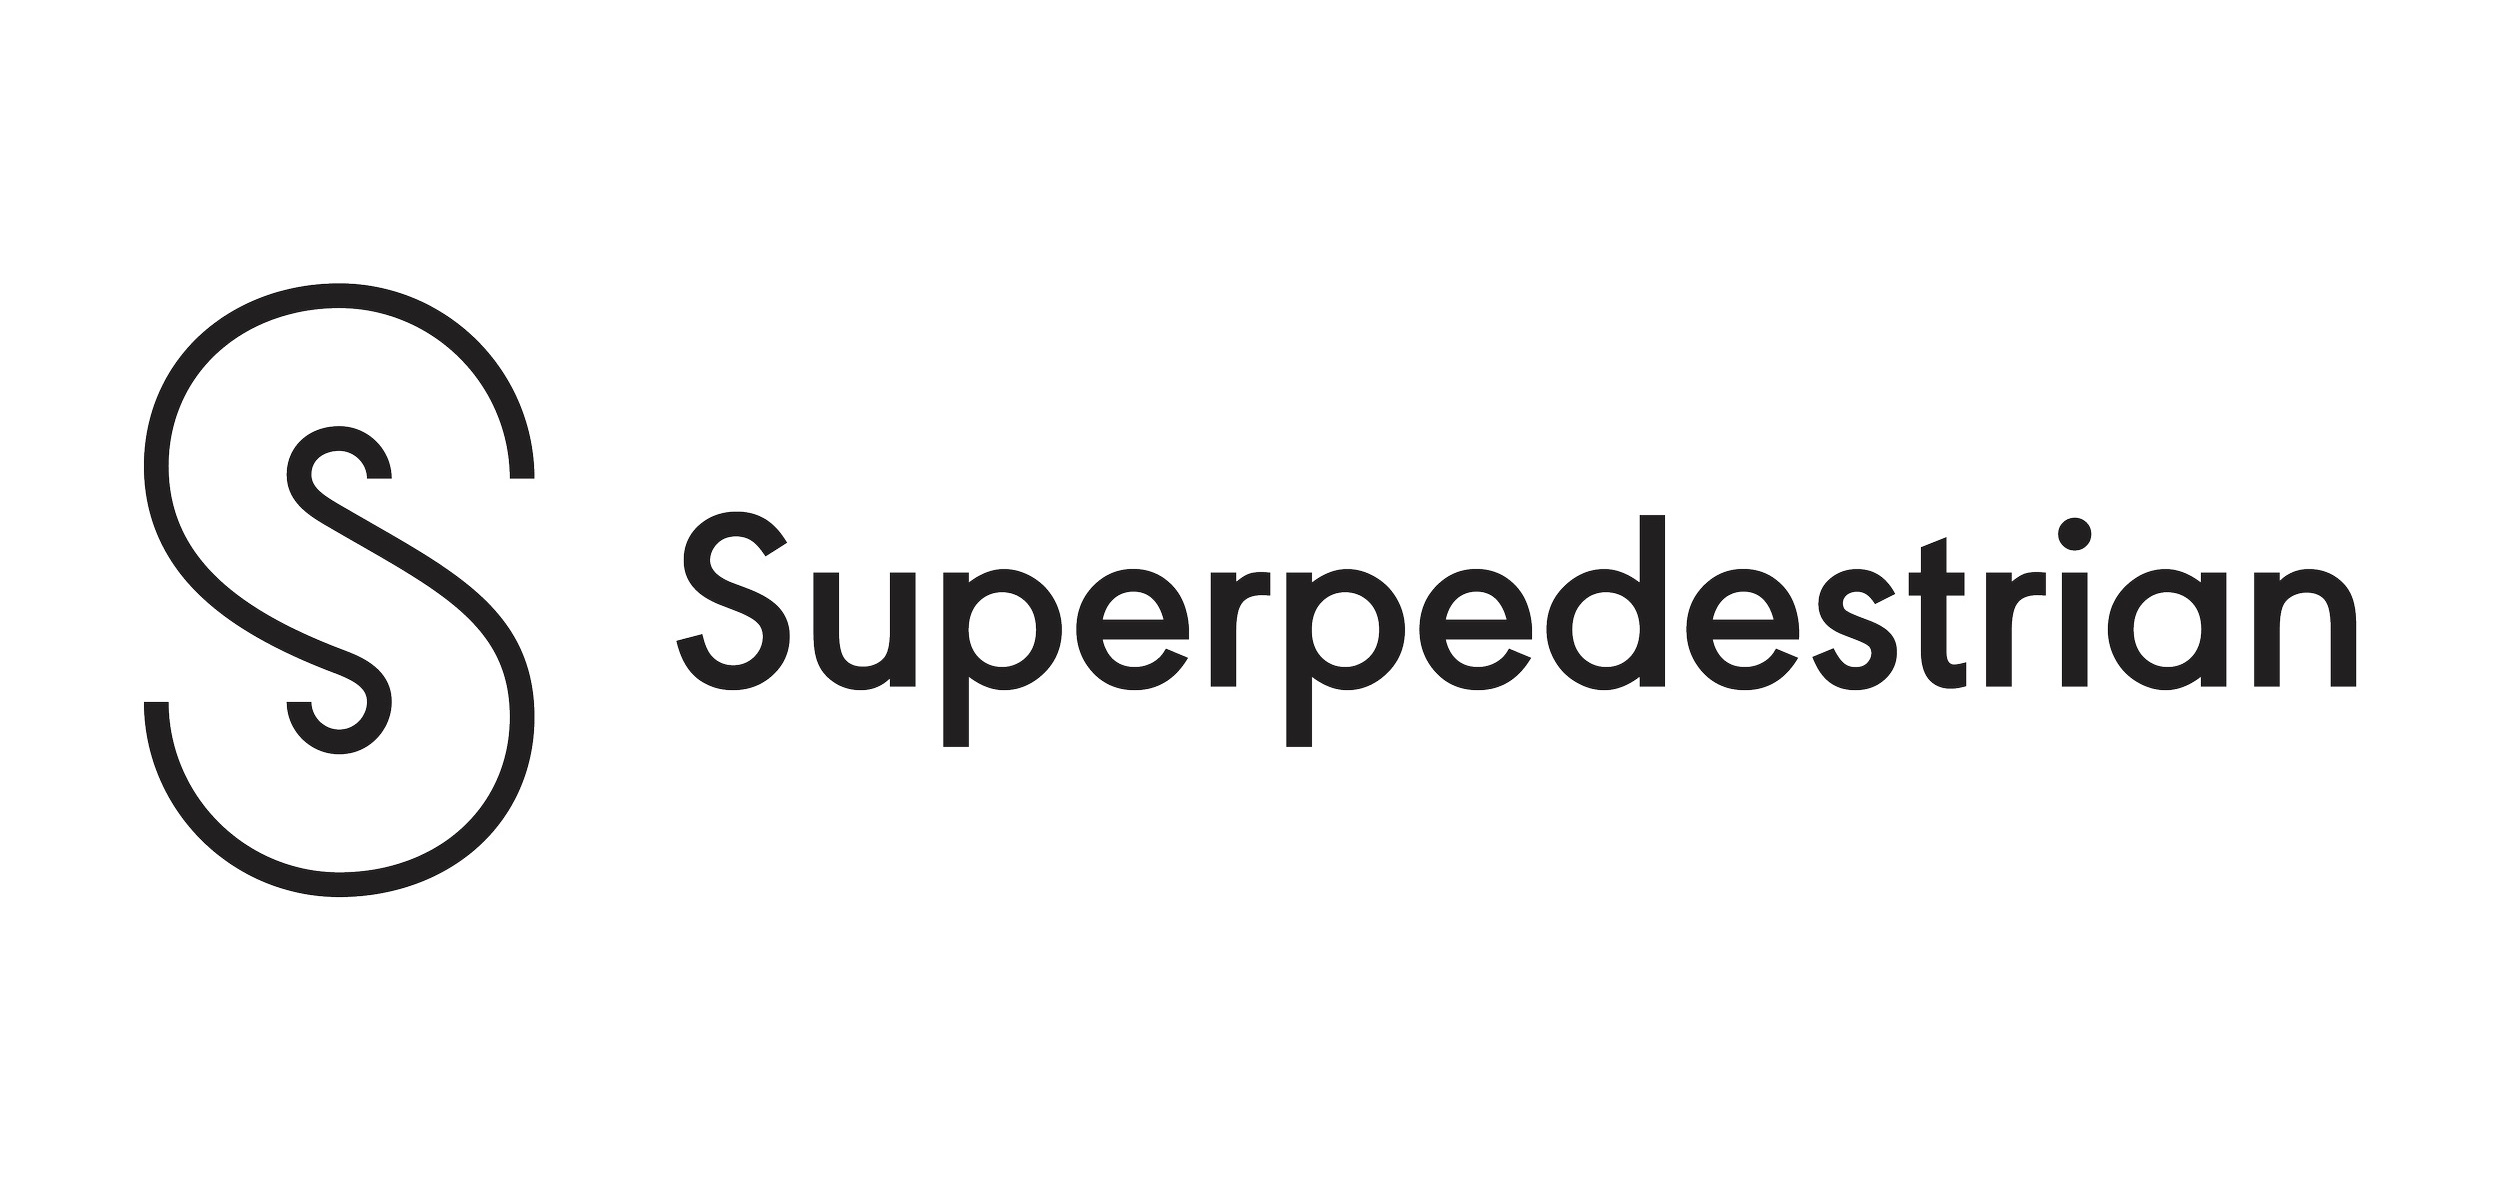 superpedestrian-to-cease-u-s-operations-and-explore-sale-of-european-business